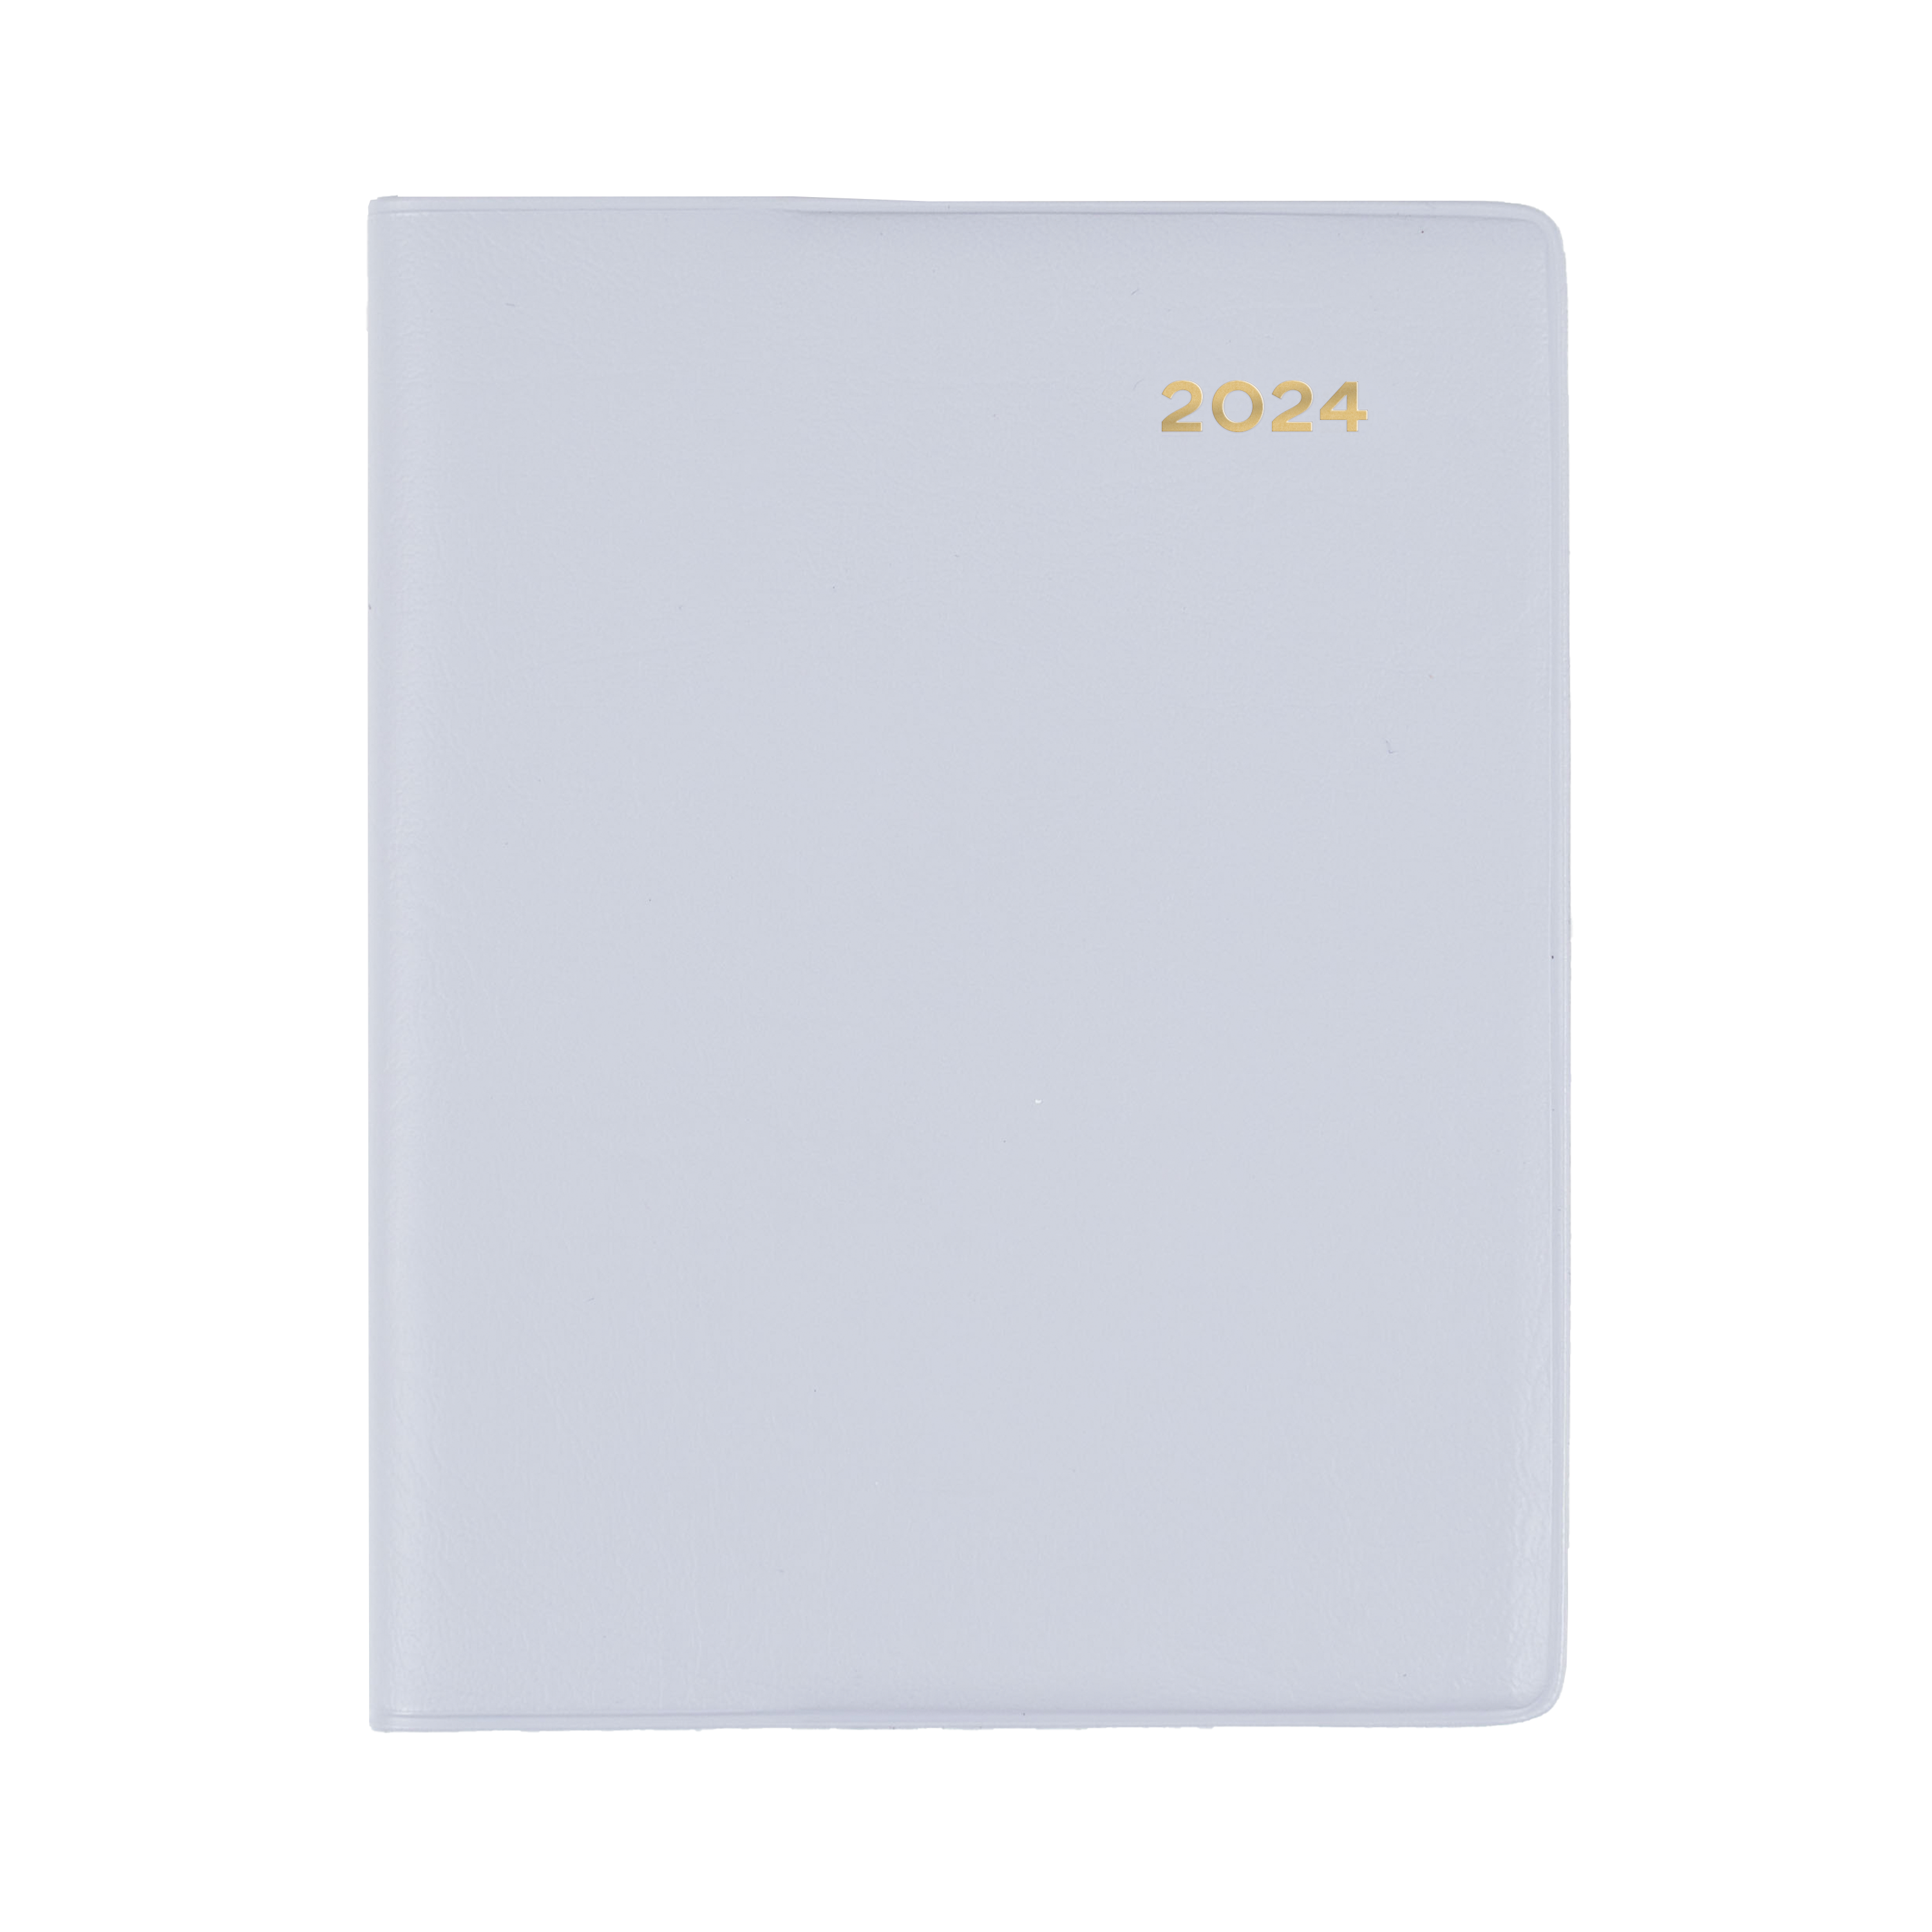 Belmont Colours 2024 Diary - Week to View with pencil, Size A7 Grey / A7 (105 x 74mm)